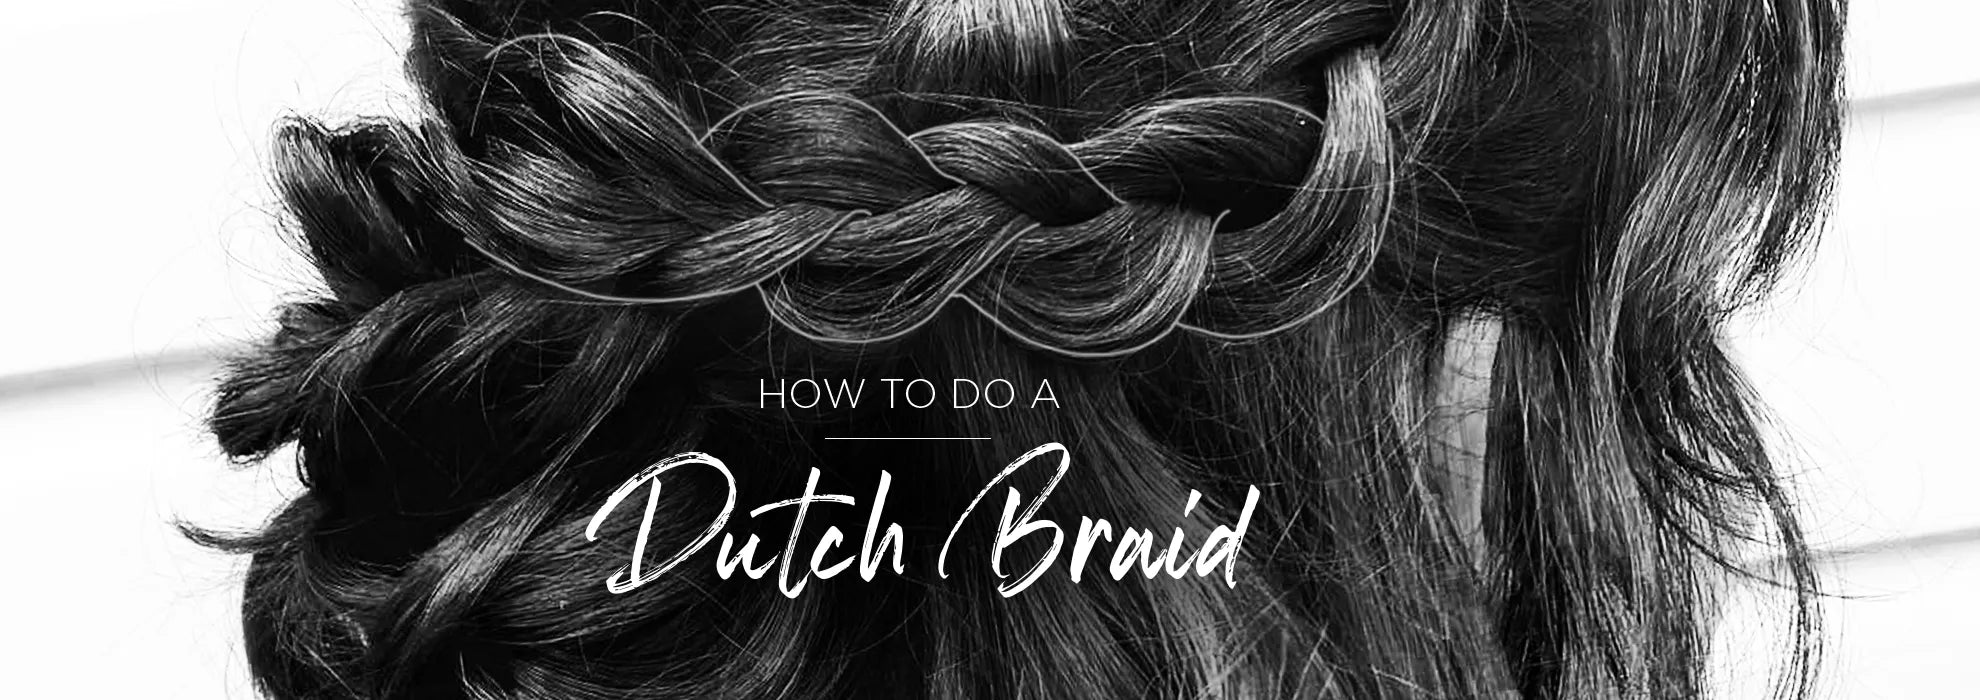 The text reads 'How to do a Dutch Braid' and the background is a model with their wavy black hair in a Dutch Braid.